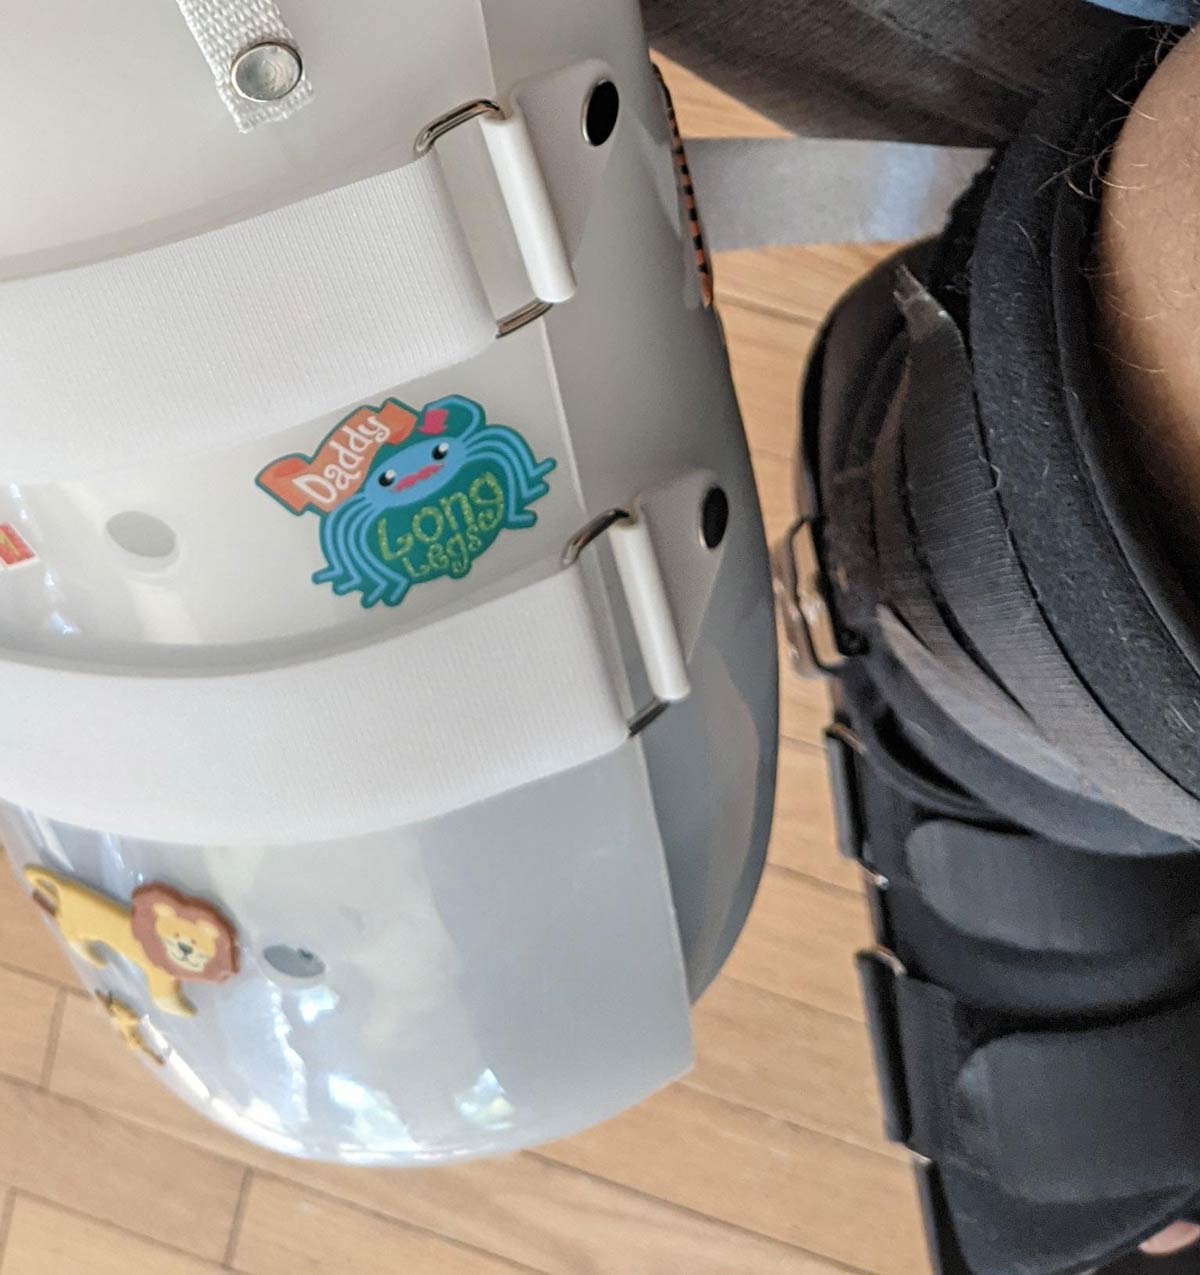 Just lost my foot after a motorcycle accident. This is the sticker my son chose to decorate my brace